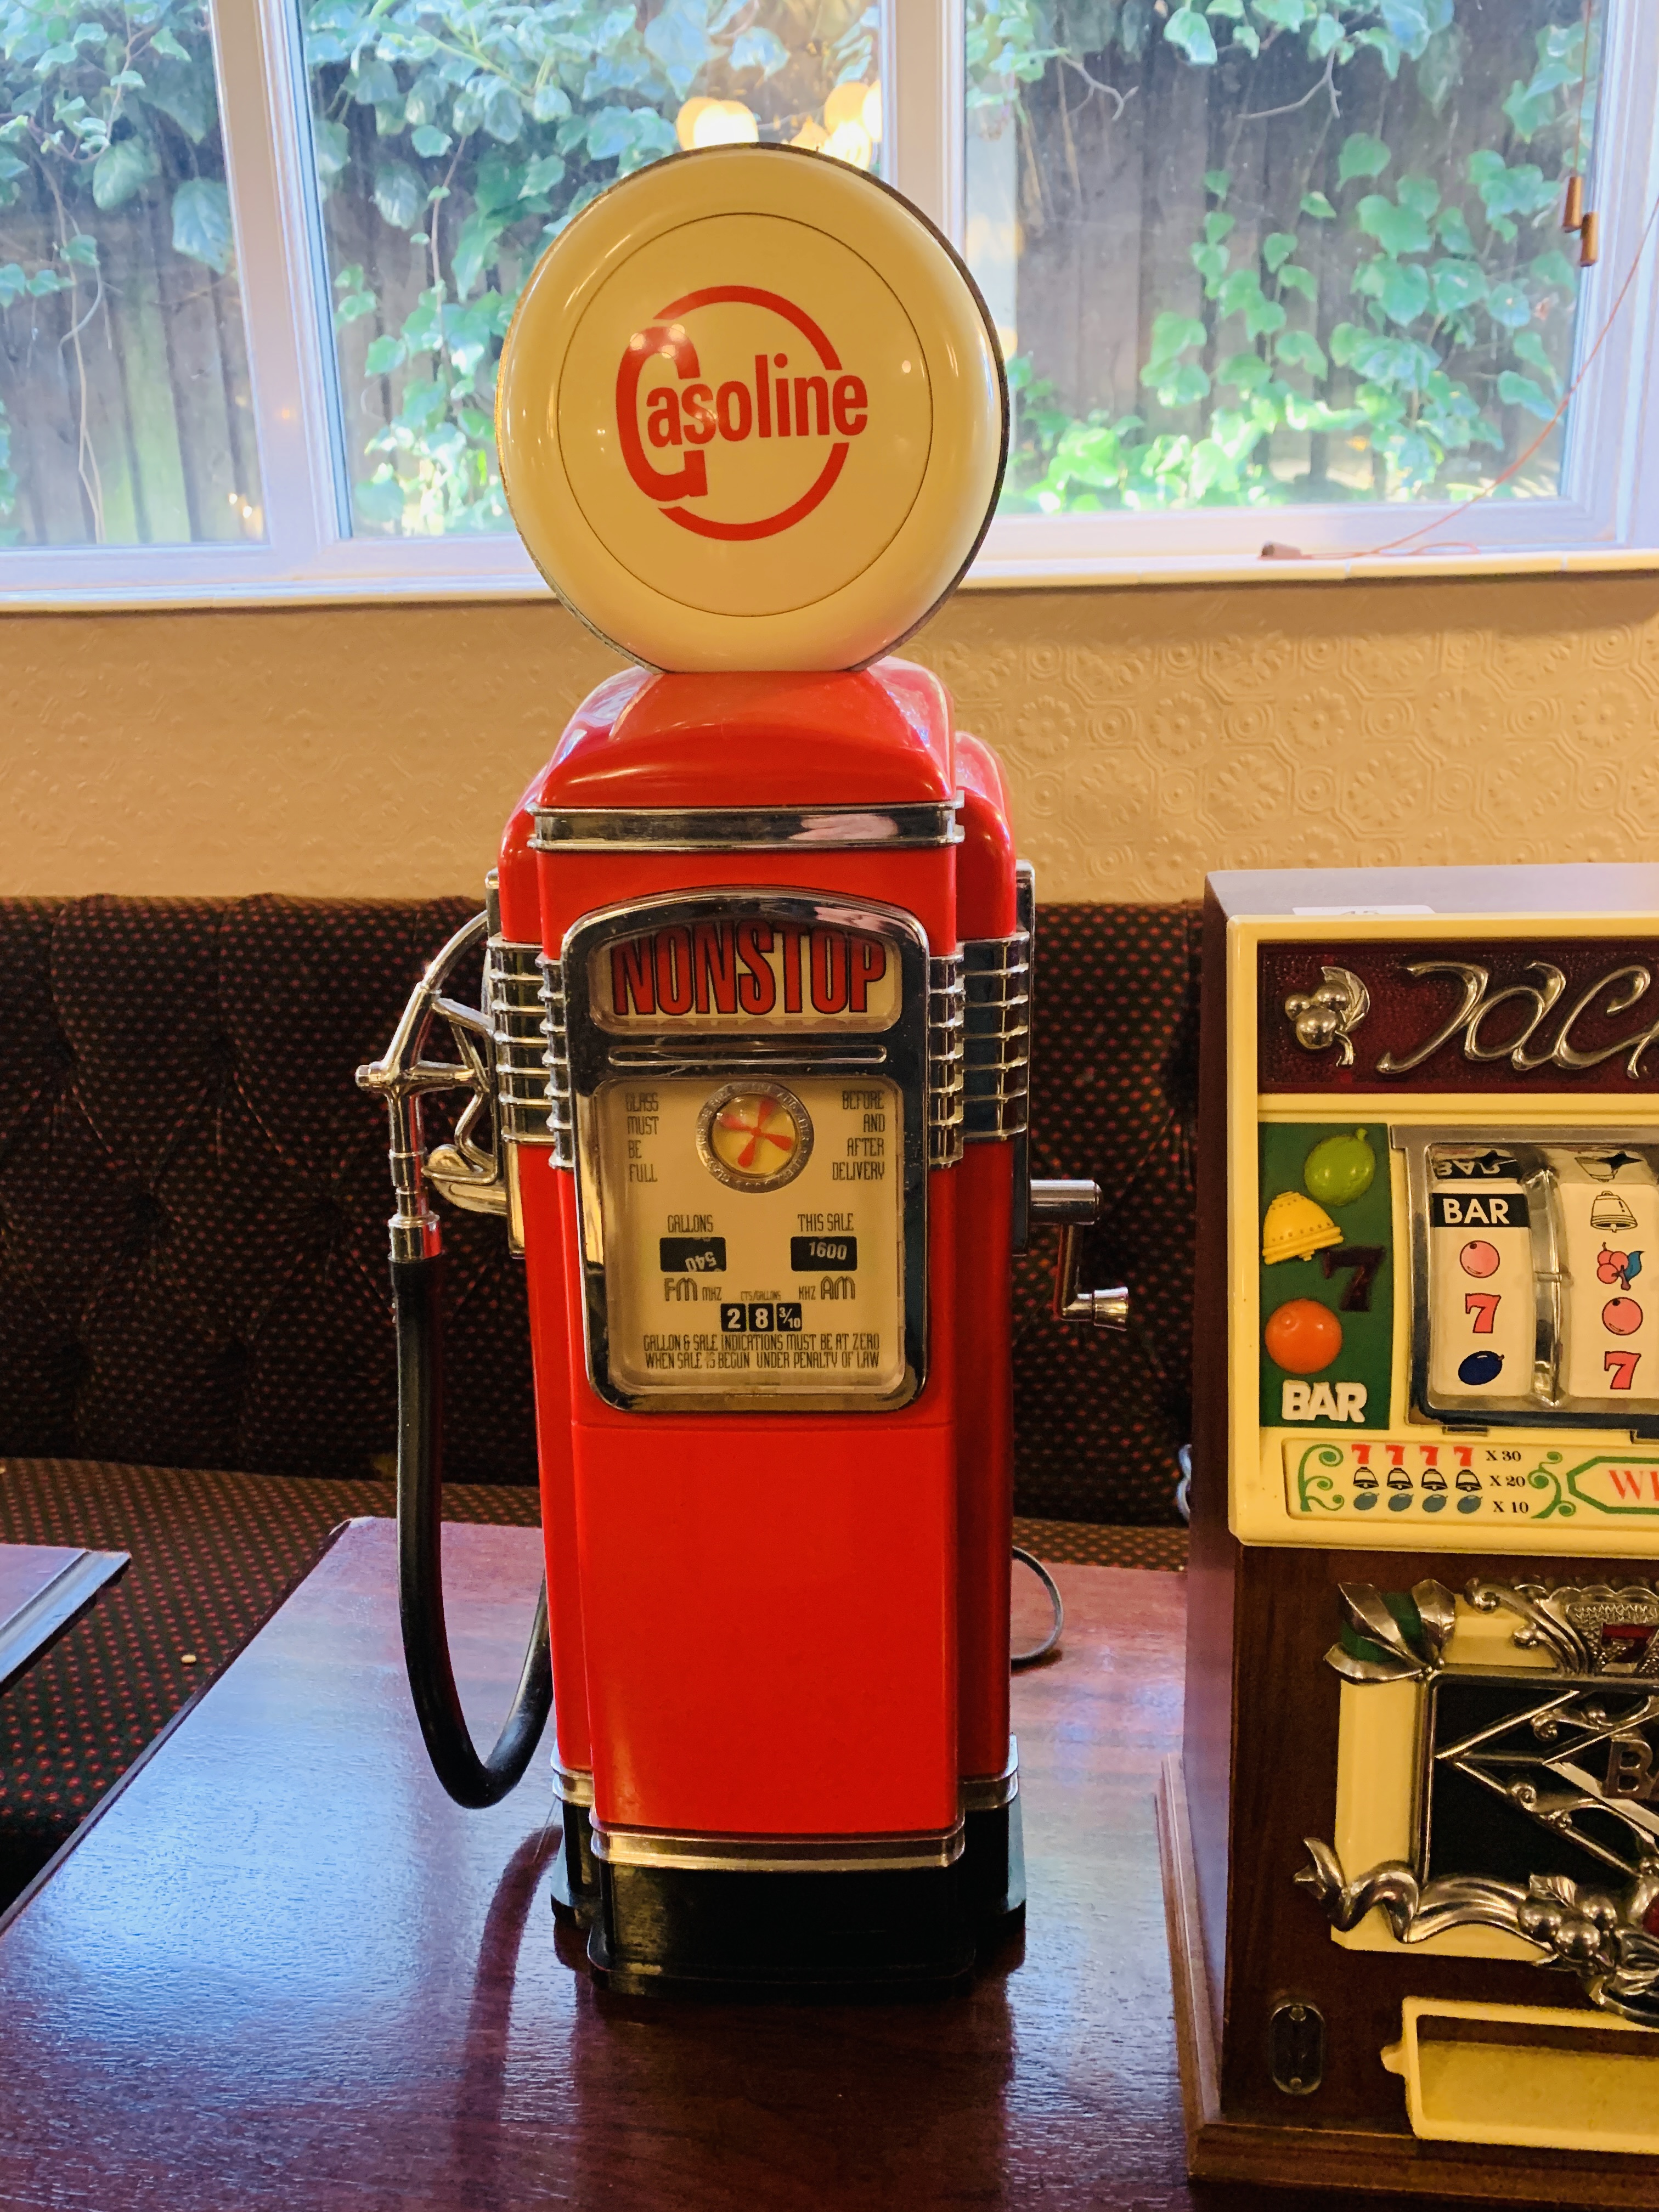 A REPRODUCTION NOVELTY RADIO FASHIONED AS "GAS PUMP" - HEIGHT 60CM AND REPRODUCTION NOVELTY RADIO - Image 3 of 3